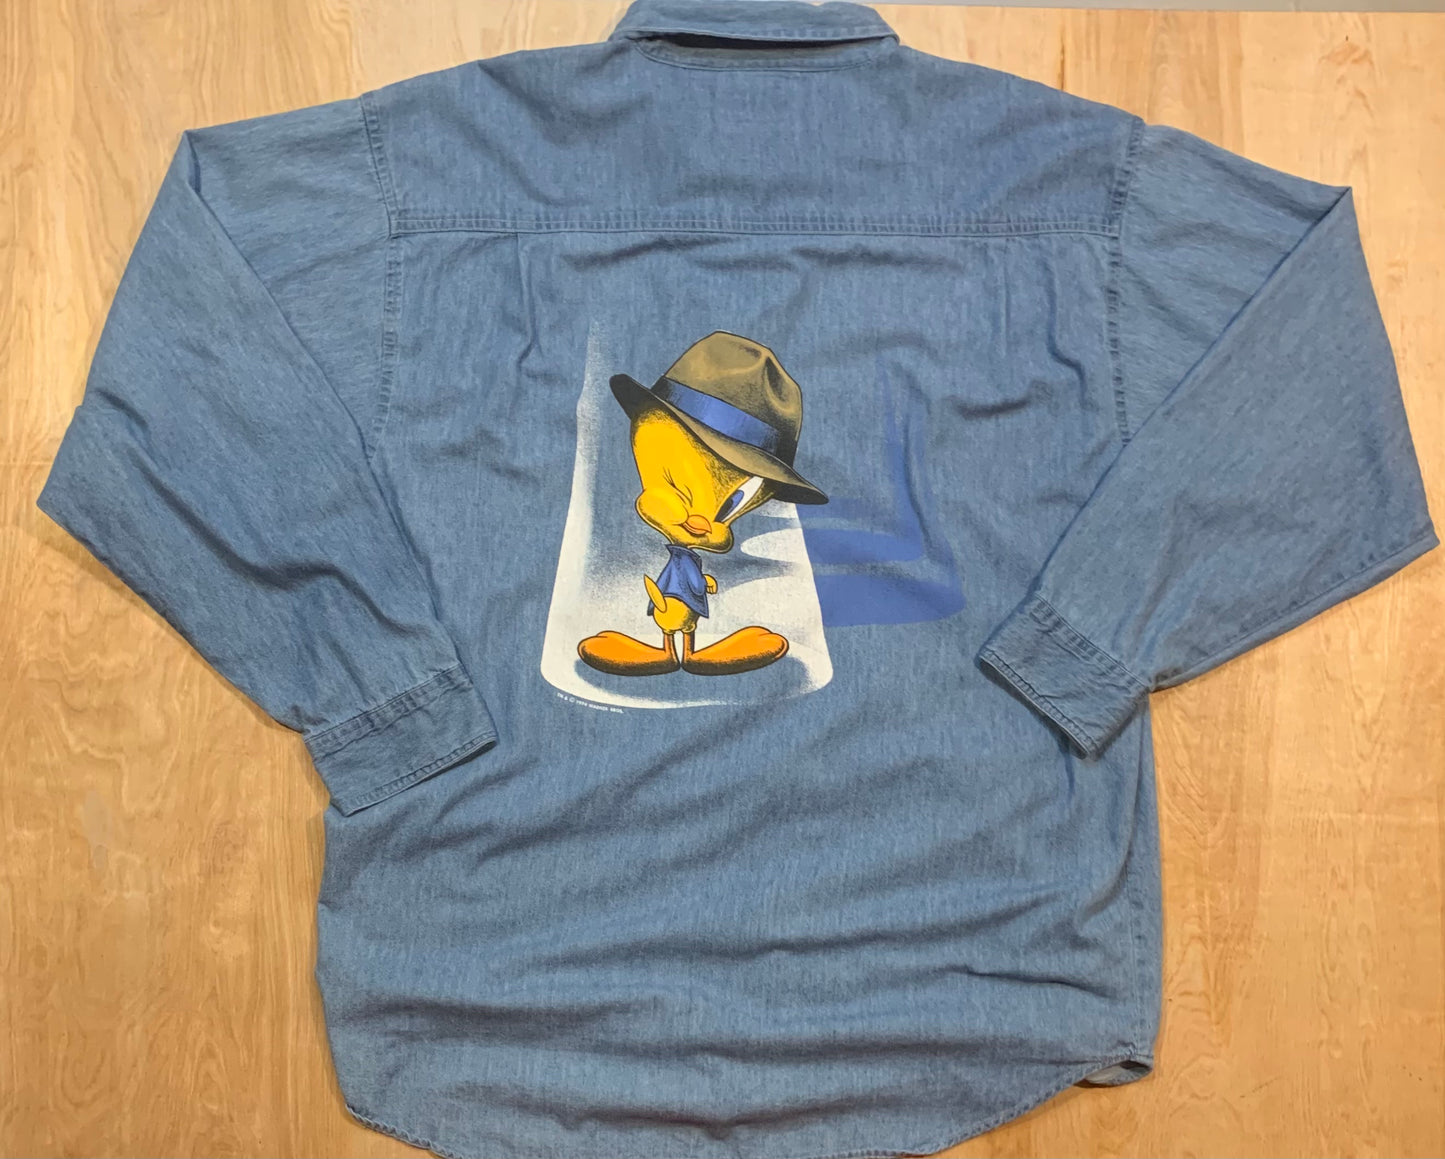 1994 Detective Tweety Long Sleeve Button Up Shirt